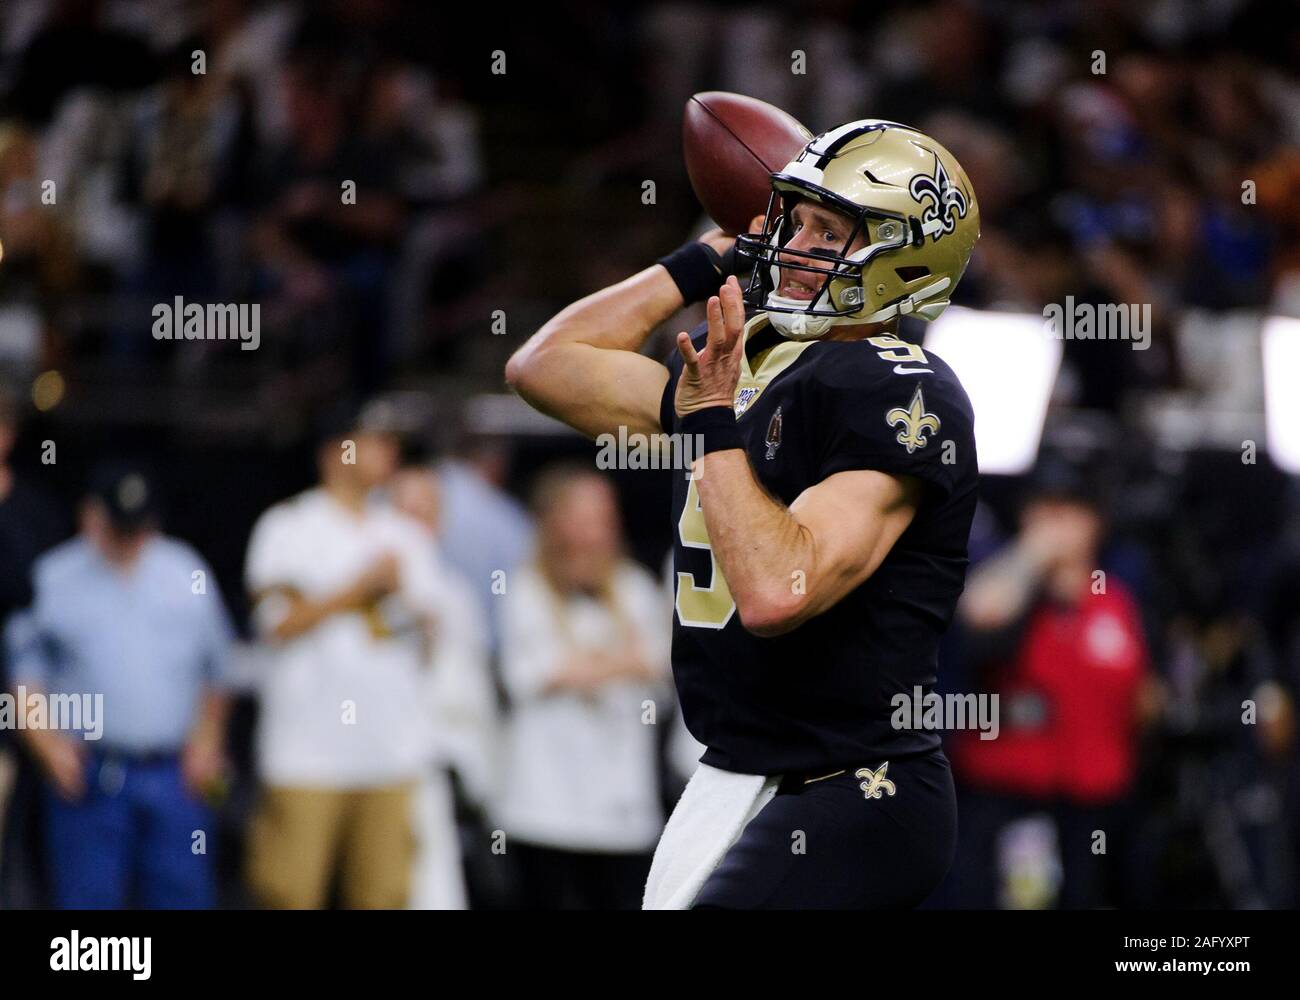 December 16 2019: New Orleans Saints quarterback Drew Brees (9) throws a pass during warmups before the NFL game between the New Orleans Saints and the New Orleans Saints at the Mercedes Benz Superdome in New Orleans, LA. Matthew Lynch/CSM Stock Photo